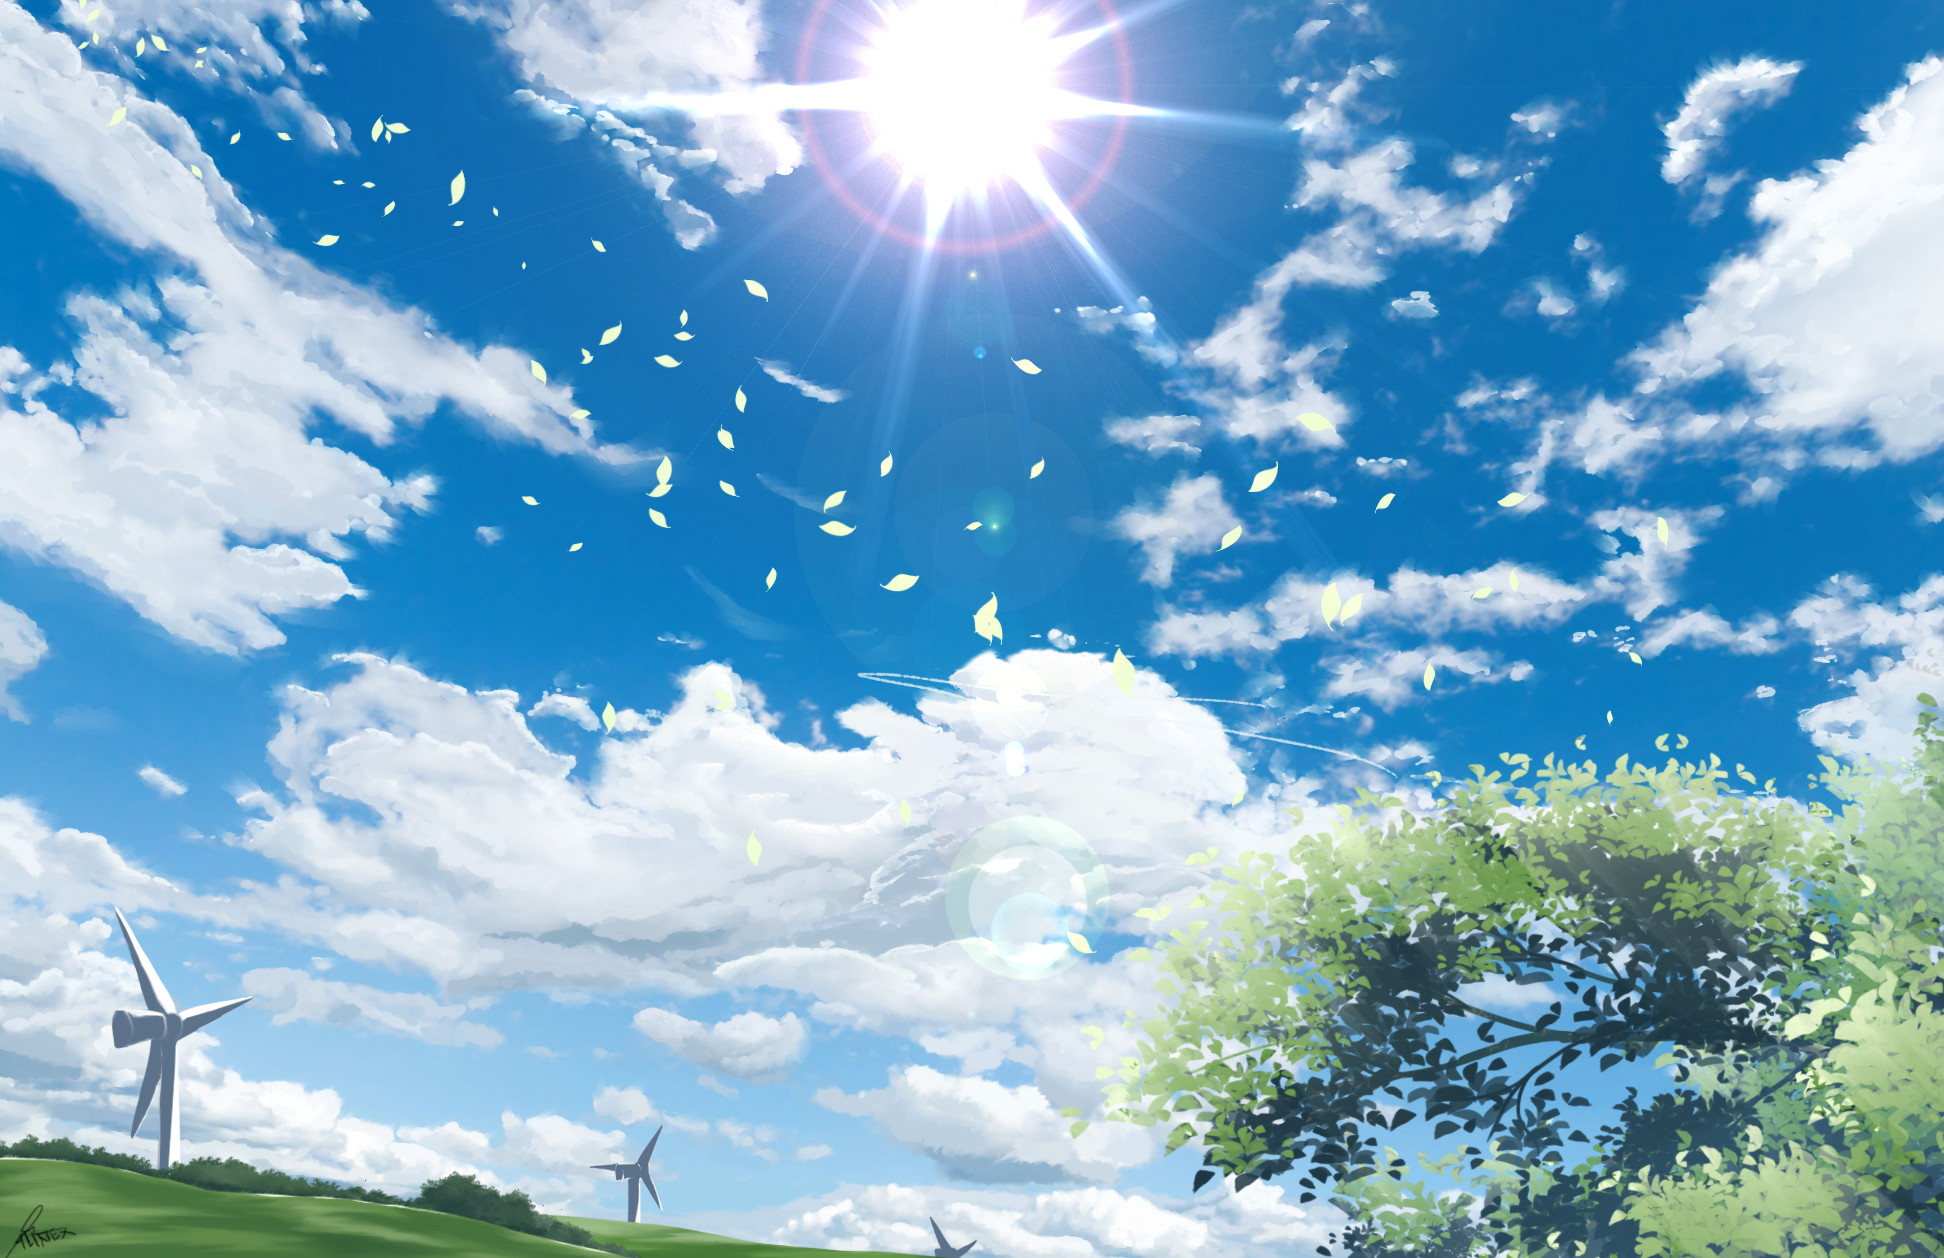 1944x1258 ... Scenery background anime expe 7 by 4LineX